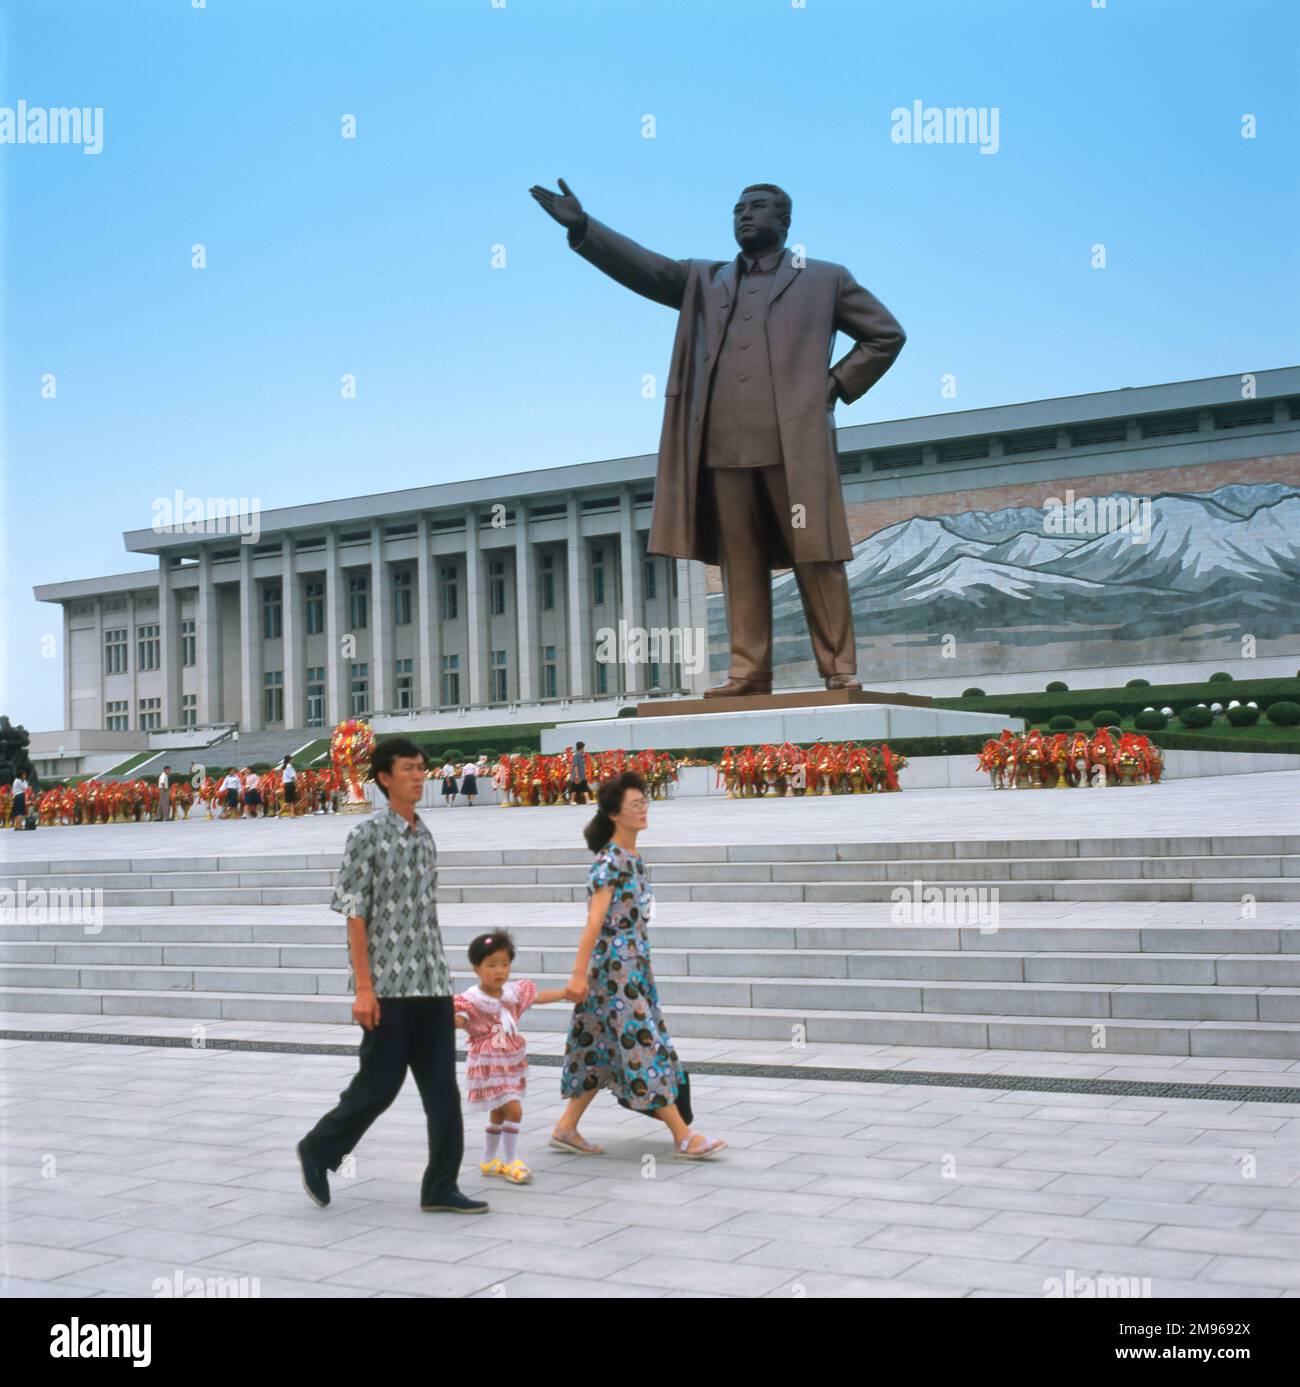 A giant statue of Kim Il Sung (1912-1994), communist leader of North Korea.  The statue is the focal point of the Mansudae Grand Monument, and is located at Mansu Hill, Pyongyang, capital of North Korea.  Twenty metres tall, it was built in 1972 to commemorate the leader's 60th birthday.  Kim Il Sung led North Korea from its founding in 1948 until his death, firstly as Prime Minister and later as President.  According to legend, the statue was originally going to be 40 metres tall, but Kim Il Sung's modesty required it to be smaller. Stock Photo